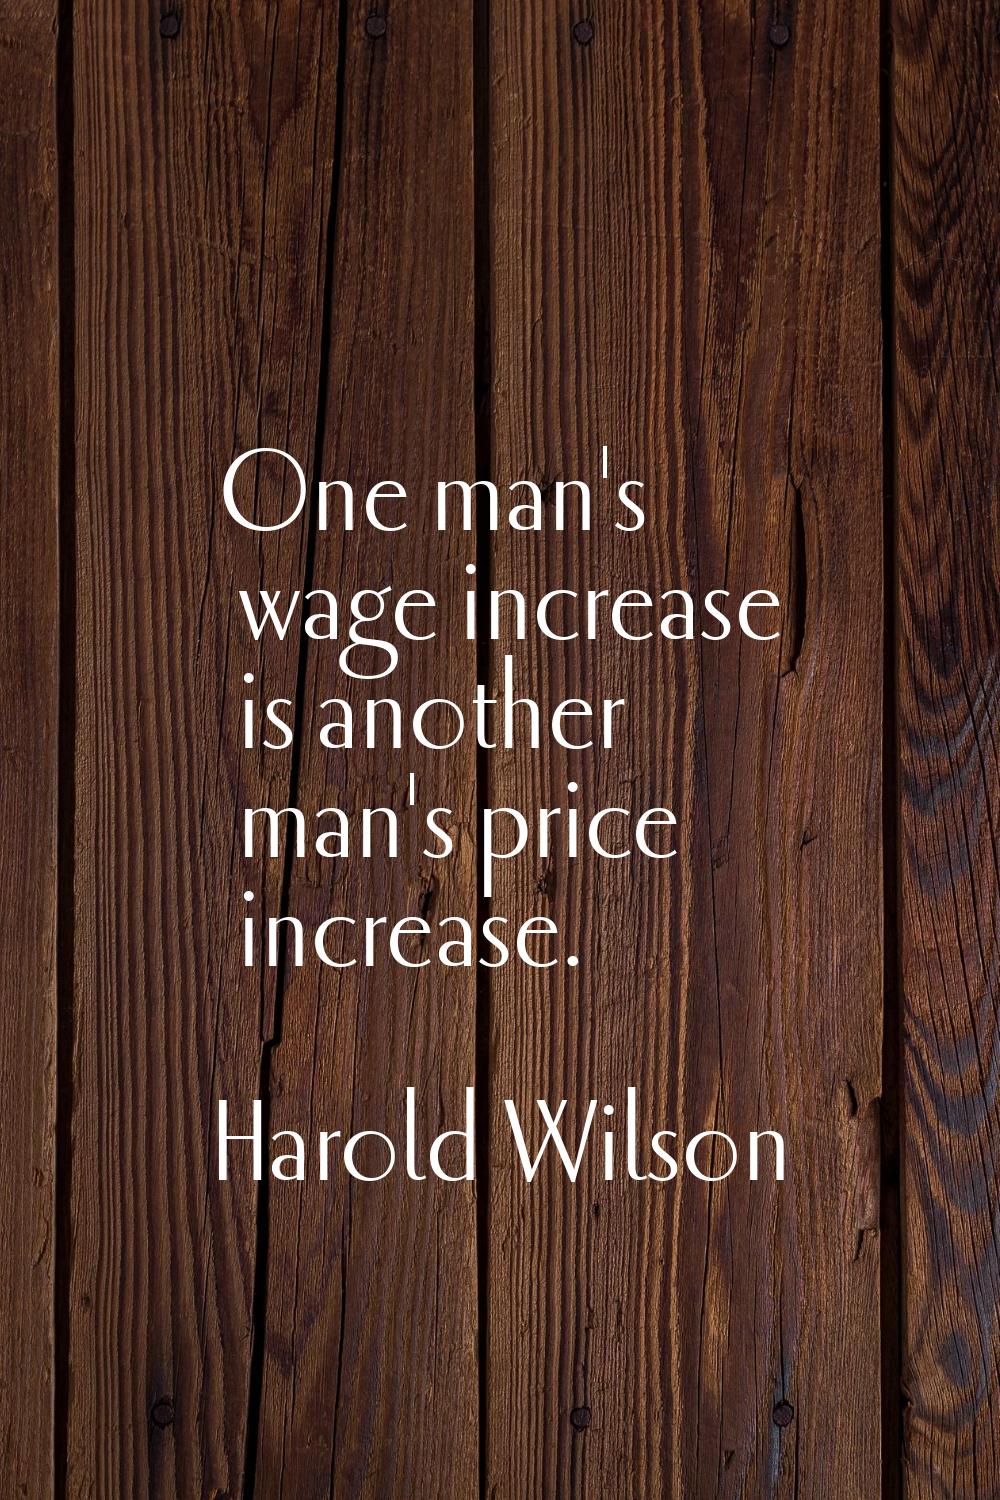 One man's wage increase is another man's price increase.